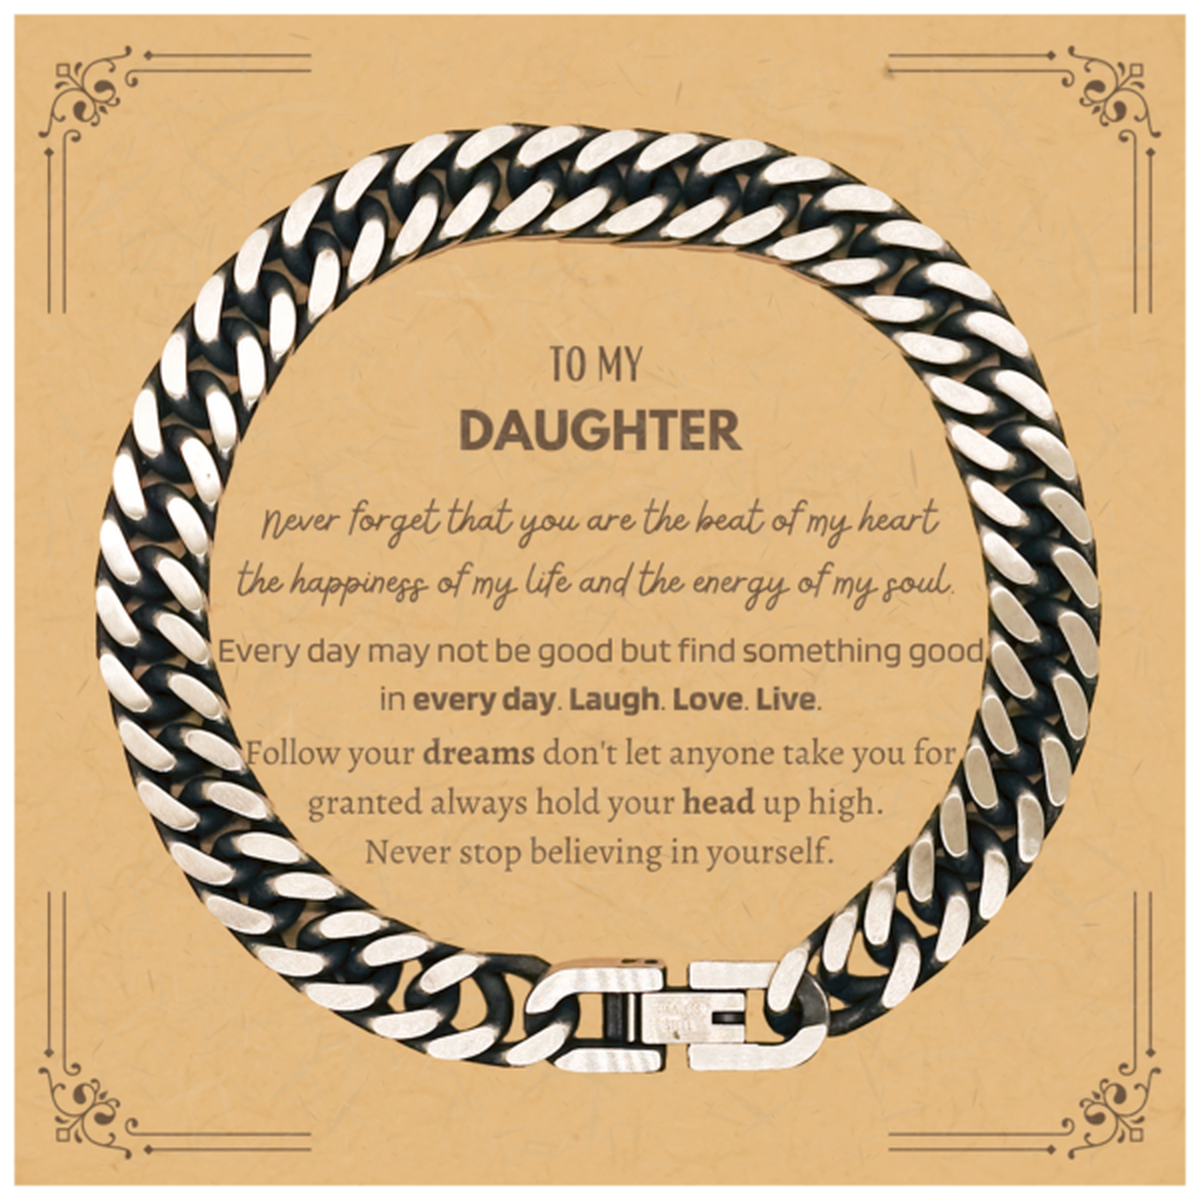 To My Daughter Message Card Gifts, Christmas Daughter Cuban Link Chain Bracelet Present, Birthday Unique Motivational For Daughter, To My Daughter Never forget that you are the beat of my heart the happiness of my life and the energy of my soul